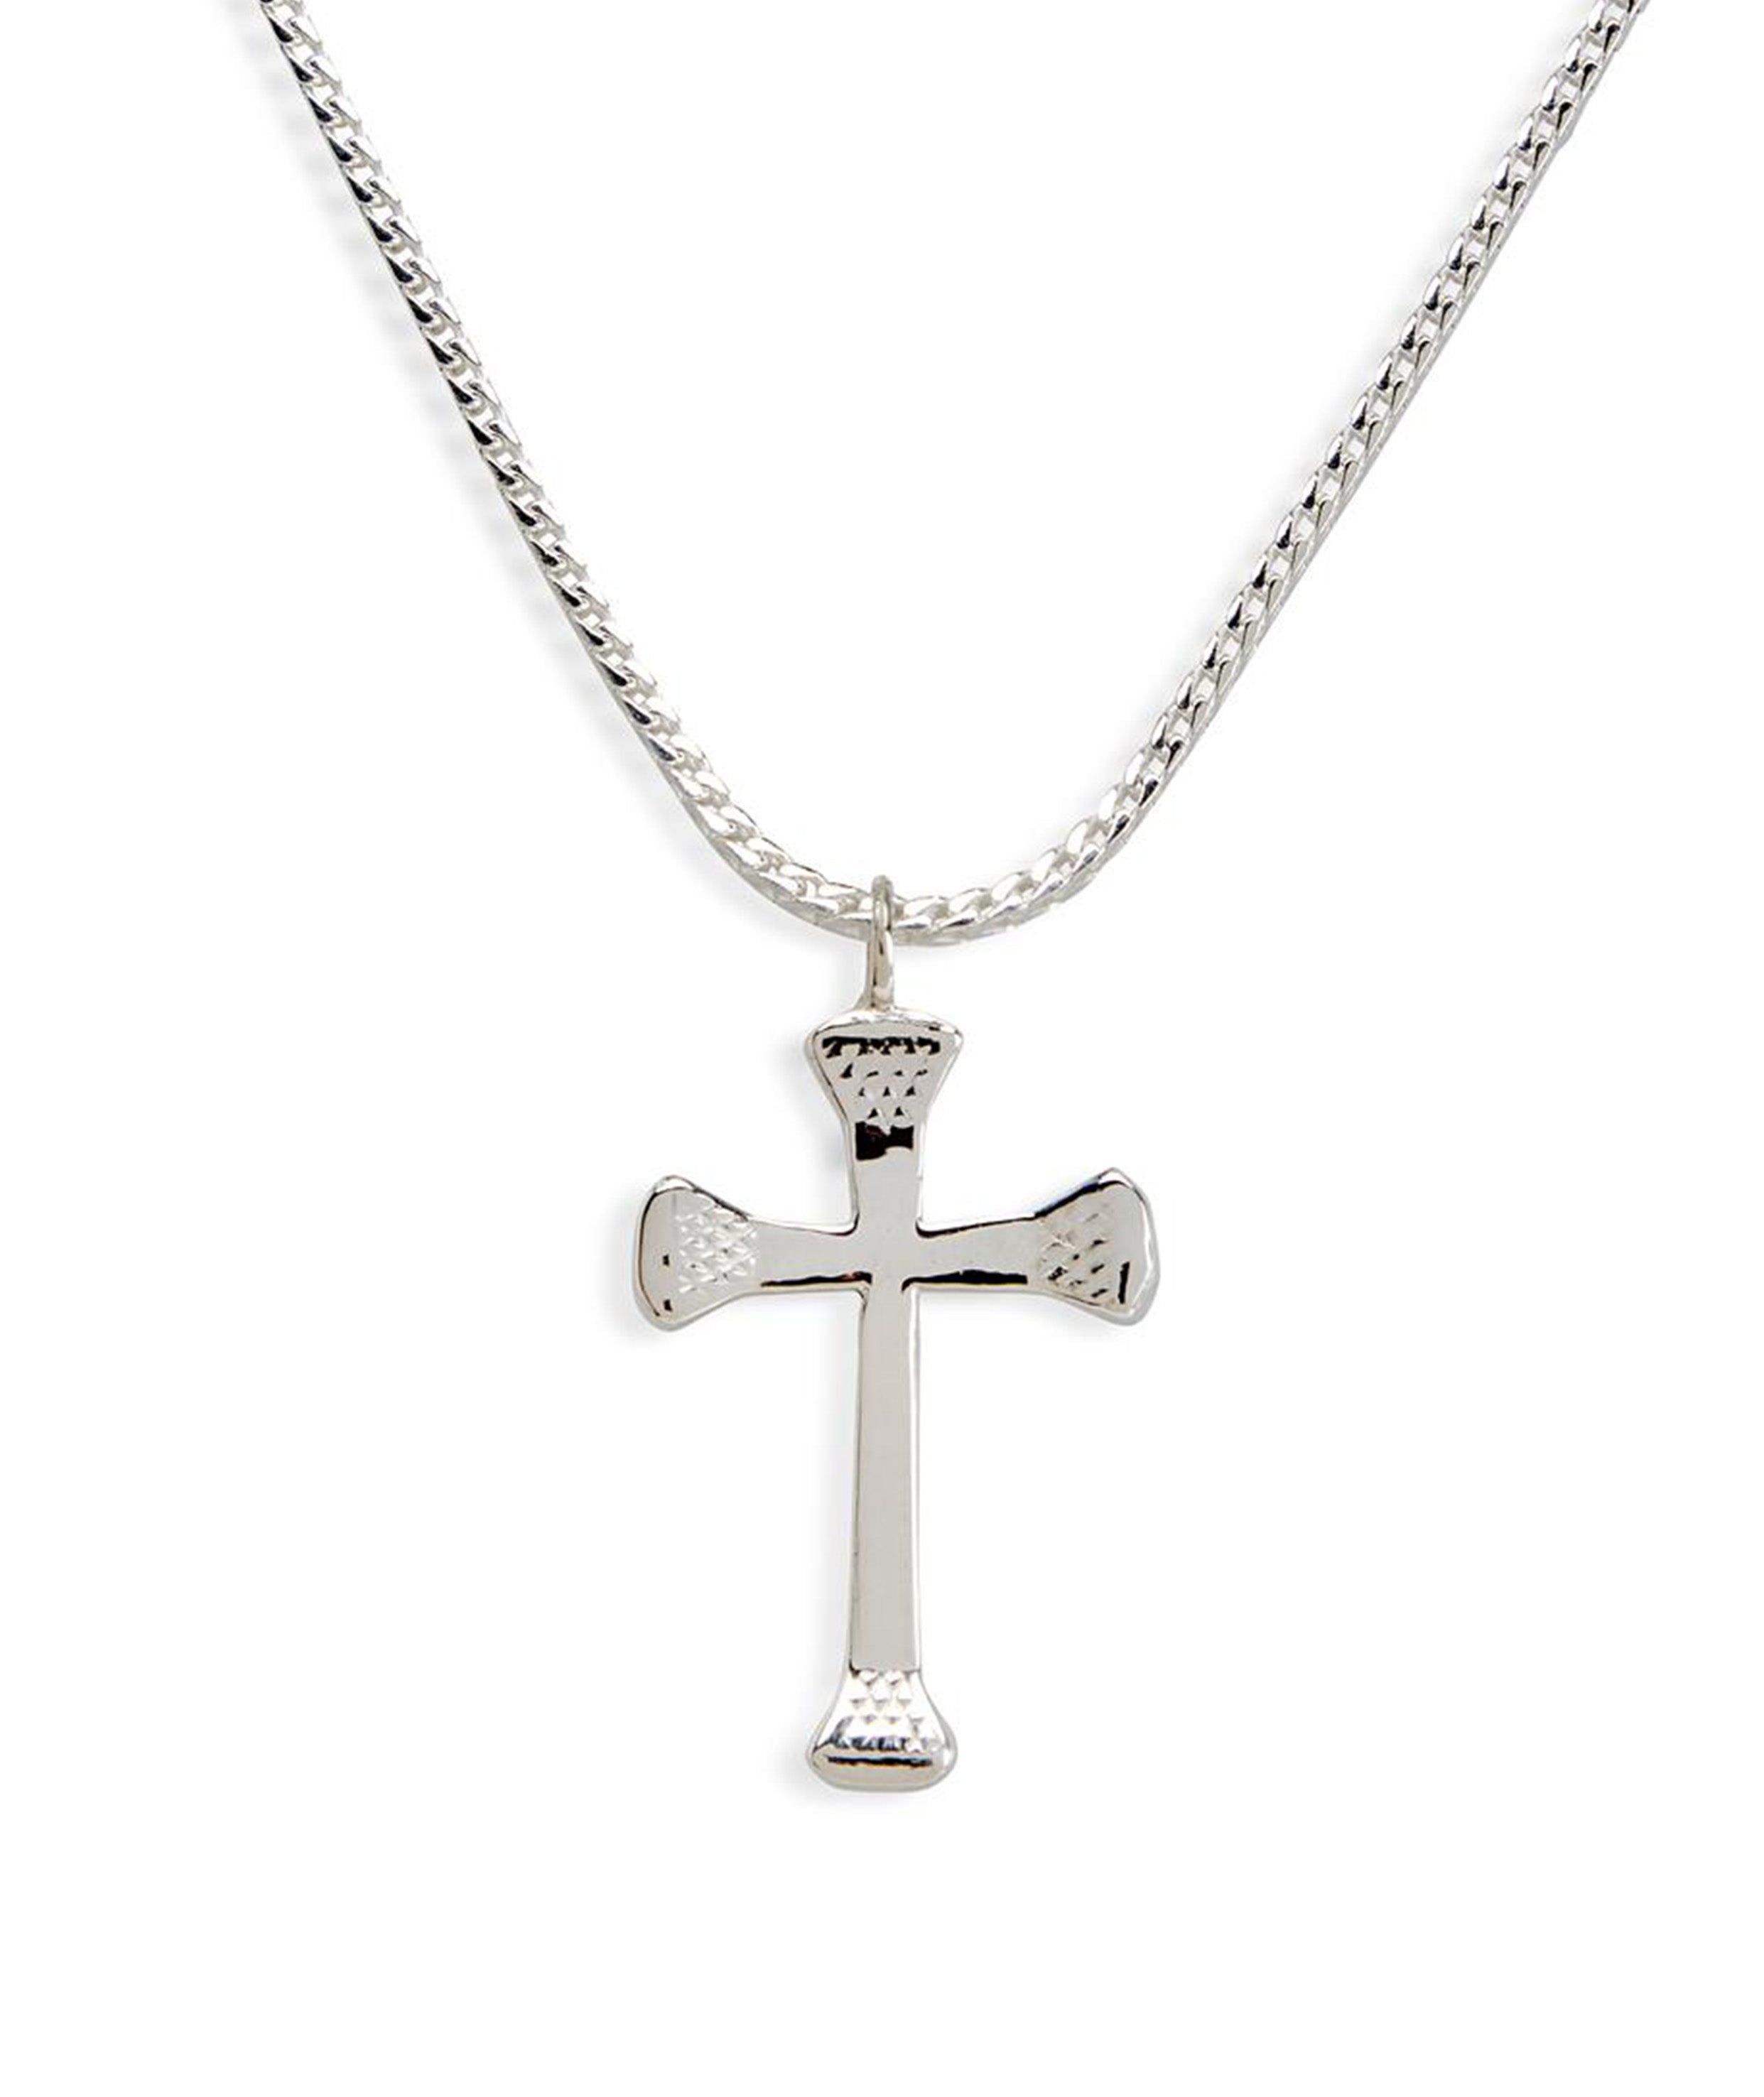 Silver Crucifix Necklace, Cross, Engraved, Christening Gift | Jewels 4 Girls